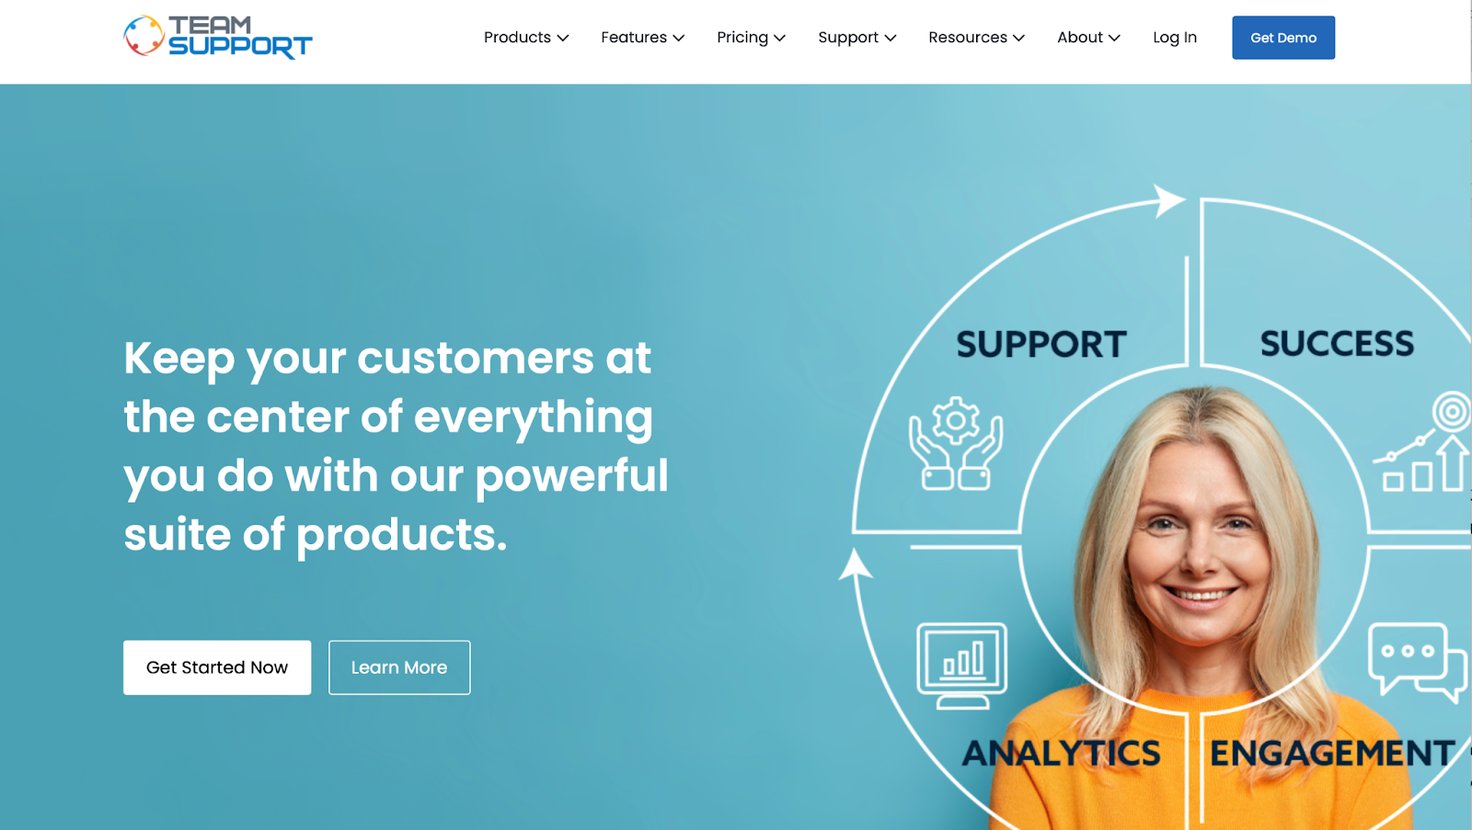 Team Support homepage: Keep your customers at the center of everything you do with our powerful suite of products.